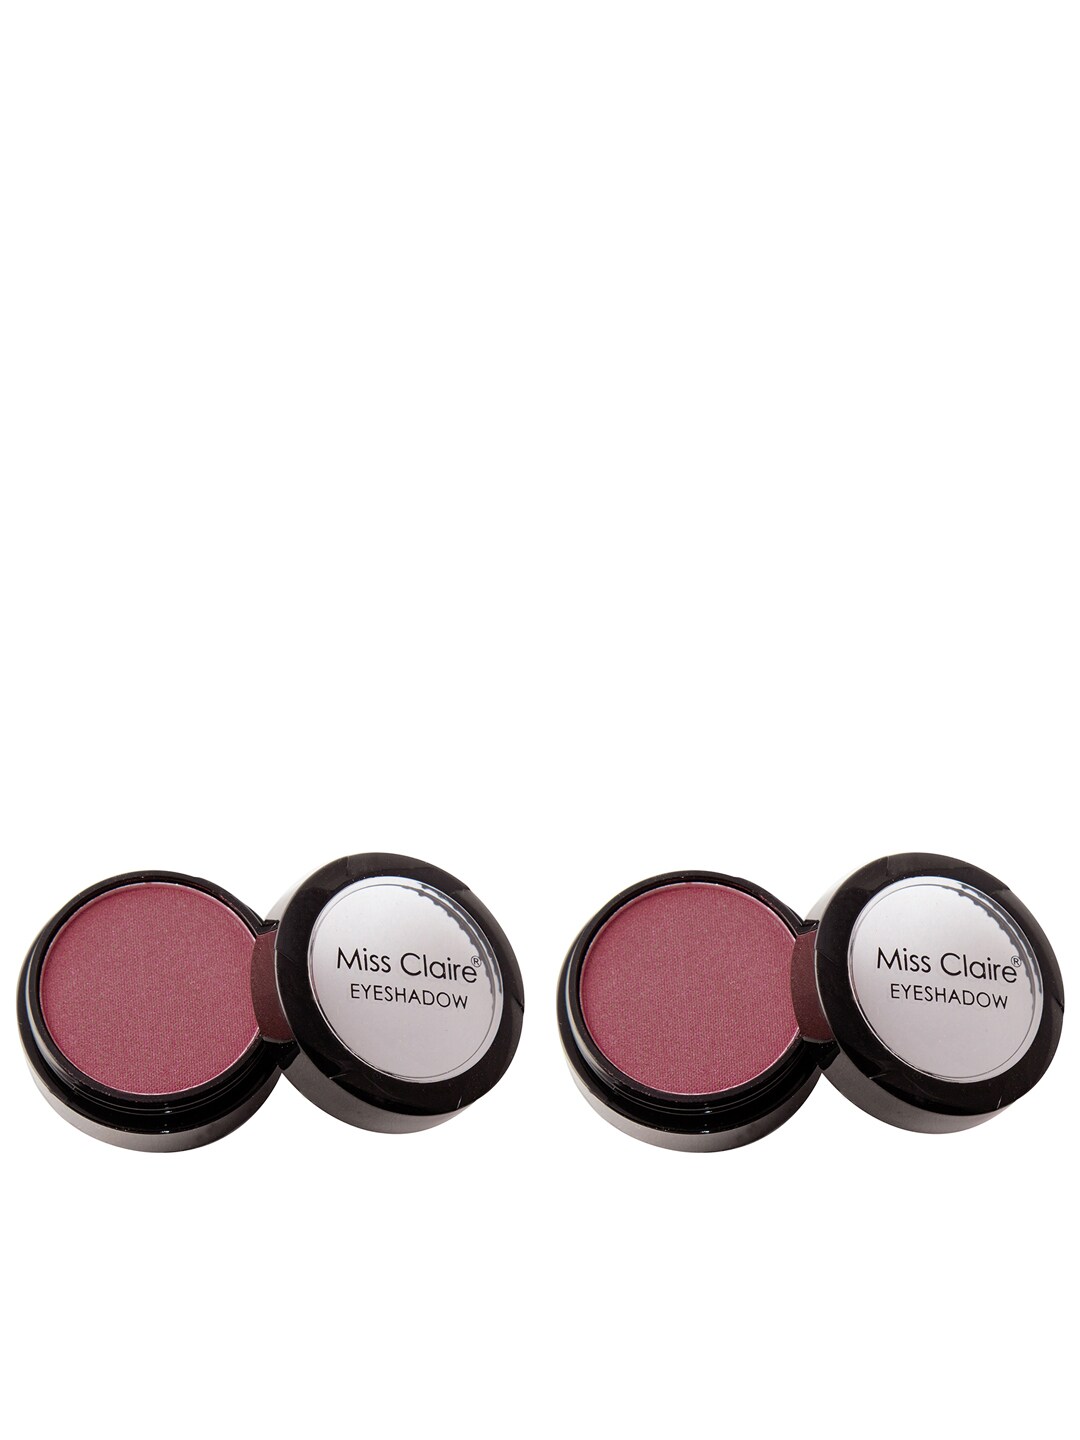 Miss Claire Set of 2 Eyeshadows Price in India